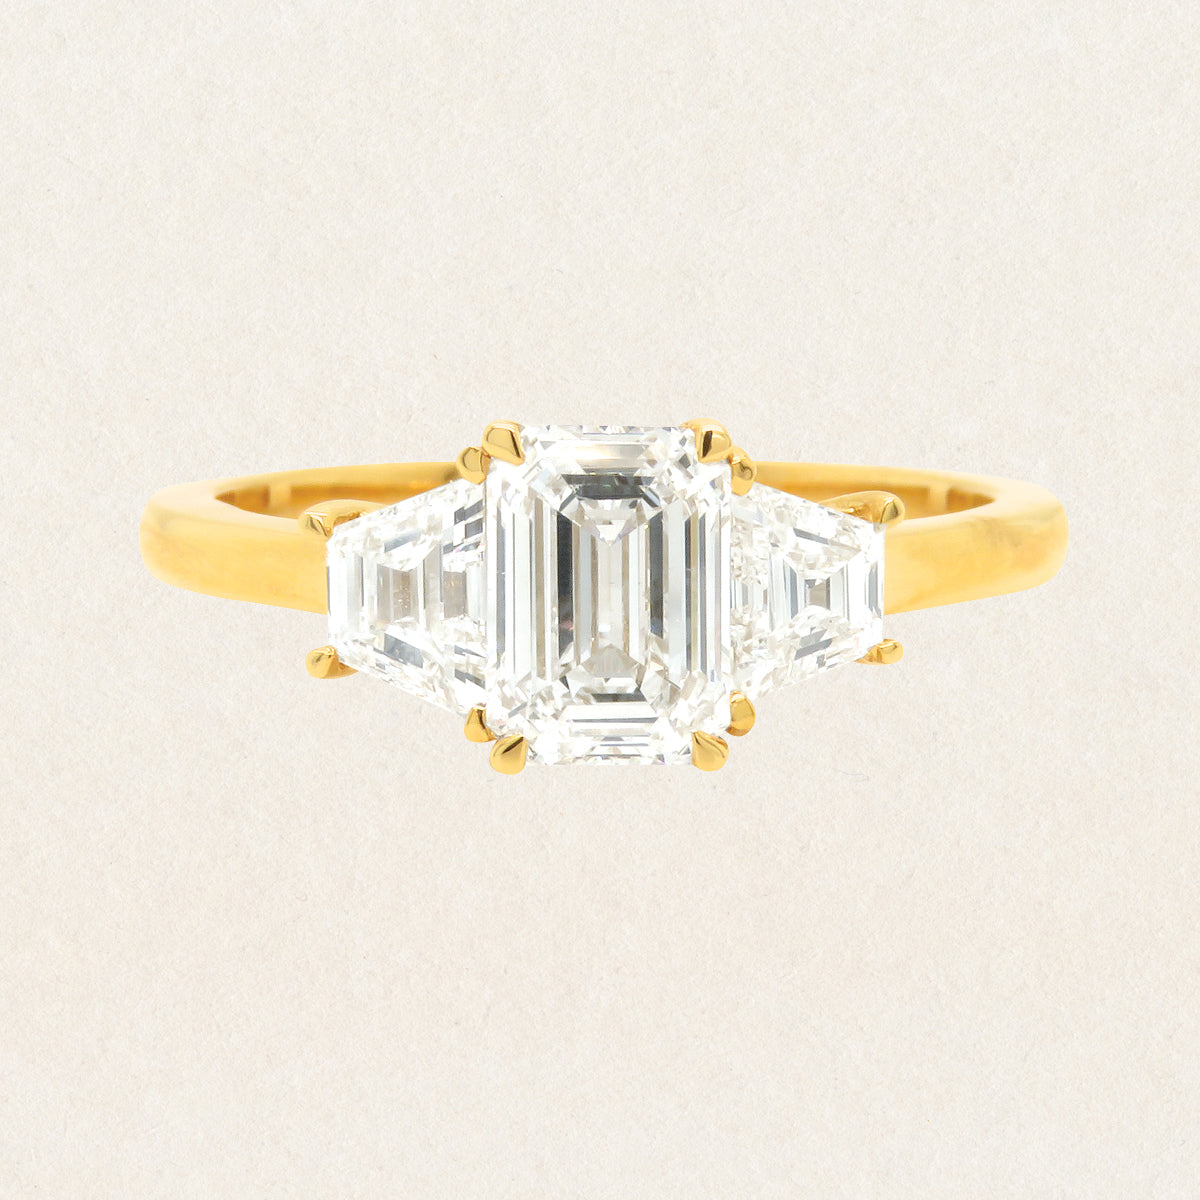 Brilliant emerald cut 1.53ct lab grown diamond trilogy ring made with 18k yellow gold